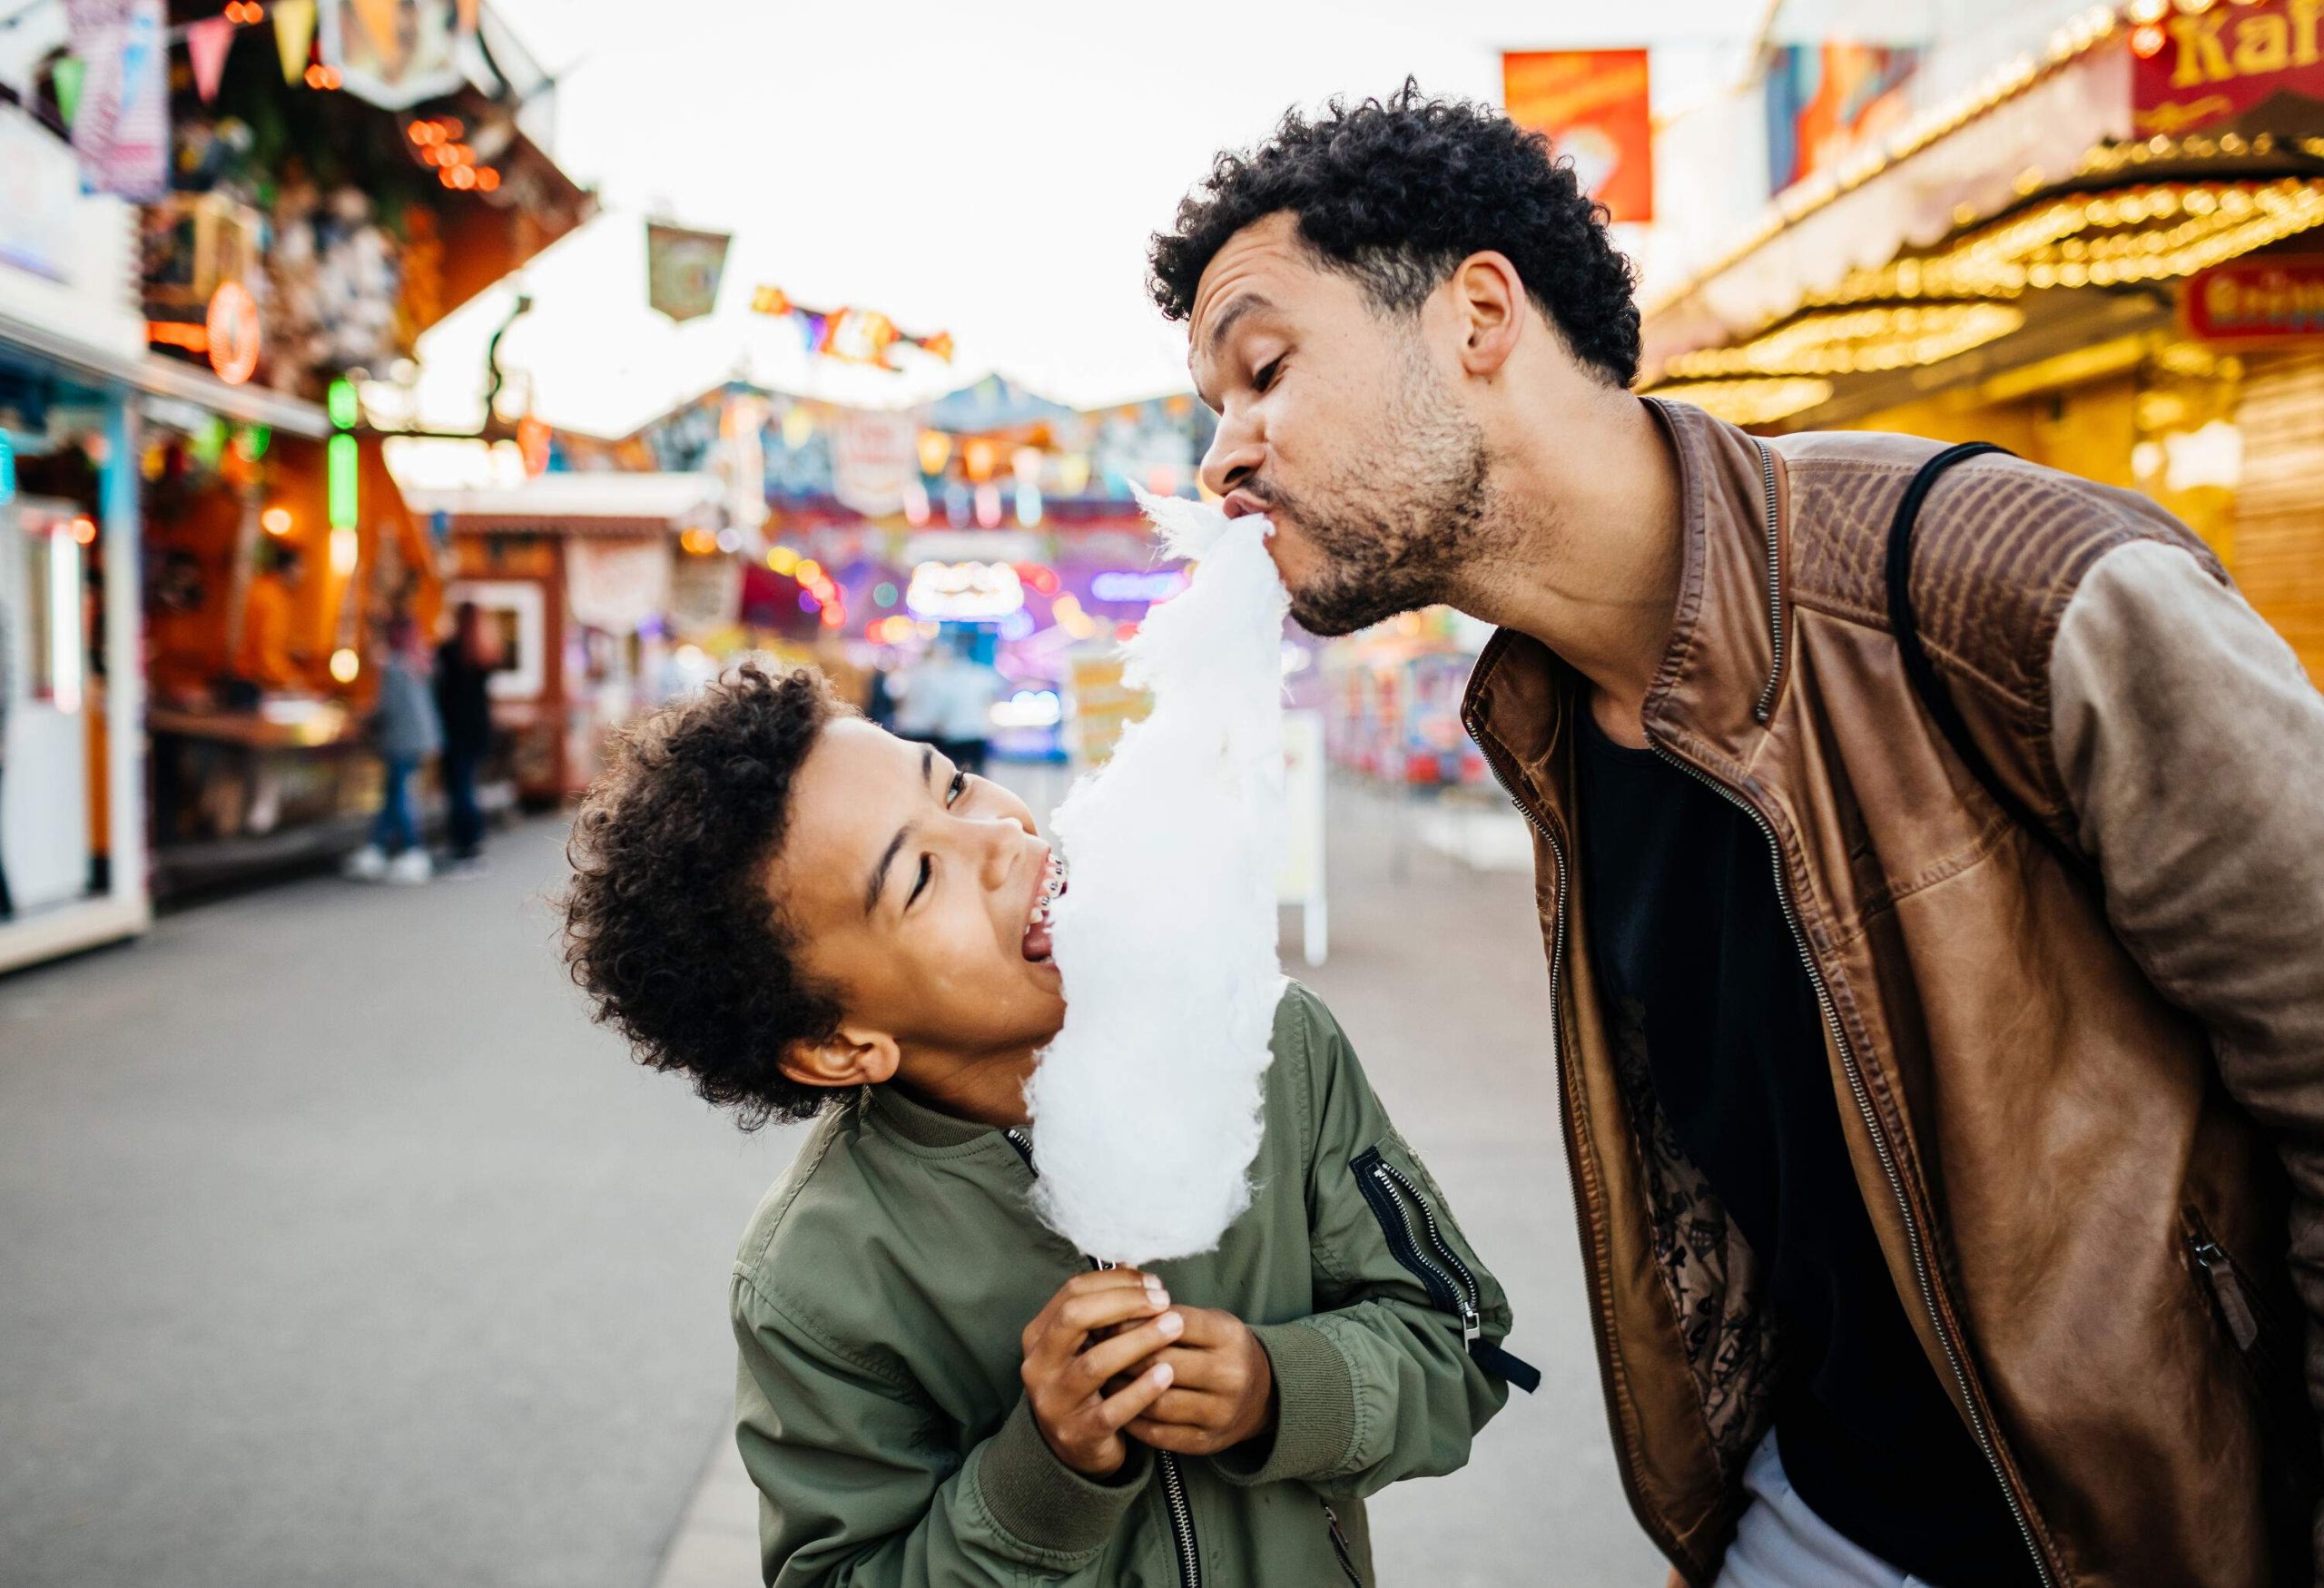 A happy father and son sharing a cotton candy on a stick against the brightly lit amusement park.